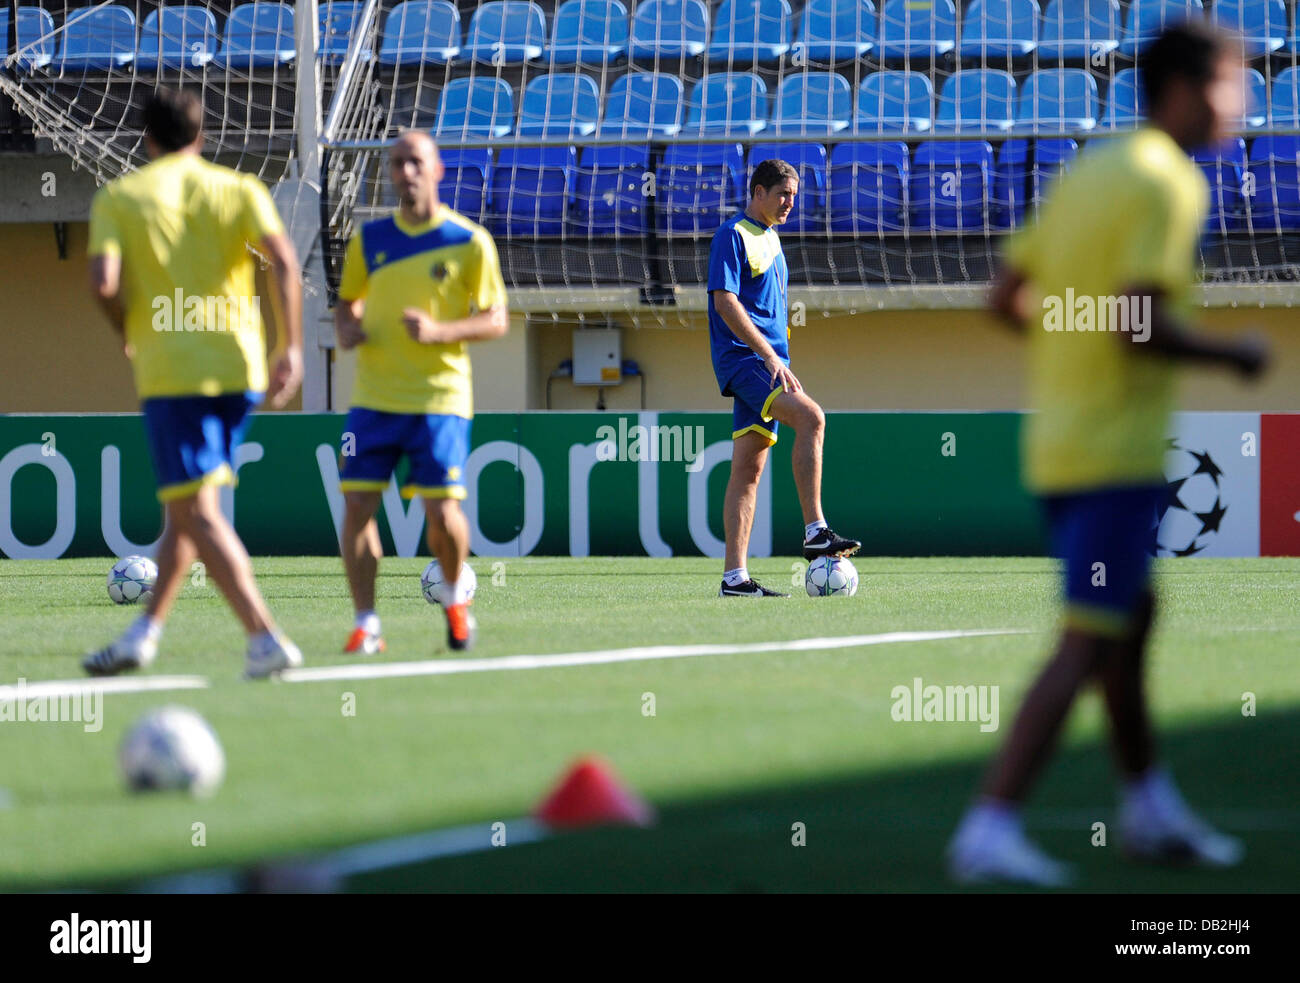 Coach of the Spanish soccer team Villarreal CF Juan Carlos Garrido (2-R) views his team during a training session at the El Madrigal stadium in Villarreal, Germany, 13 September 2011. Villarreal faces Bayern Munich for the first Champions League group match on 14 September 2011. Photo: Andreas Gebert Stock Photo